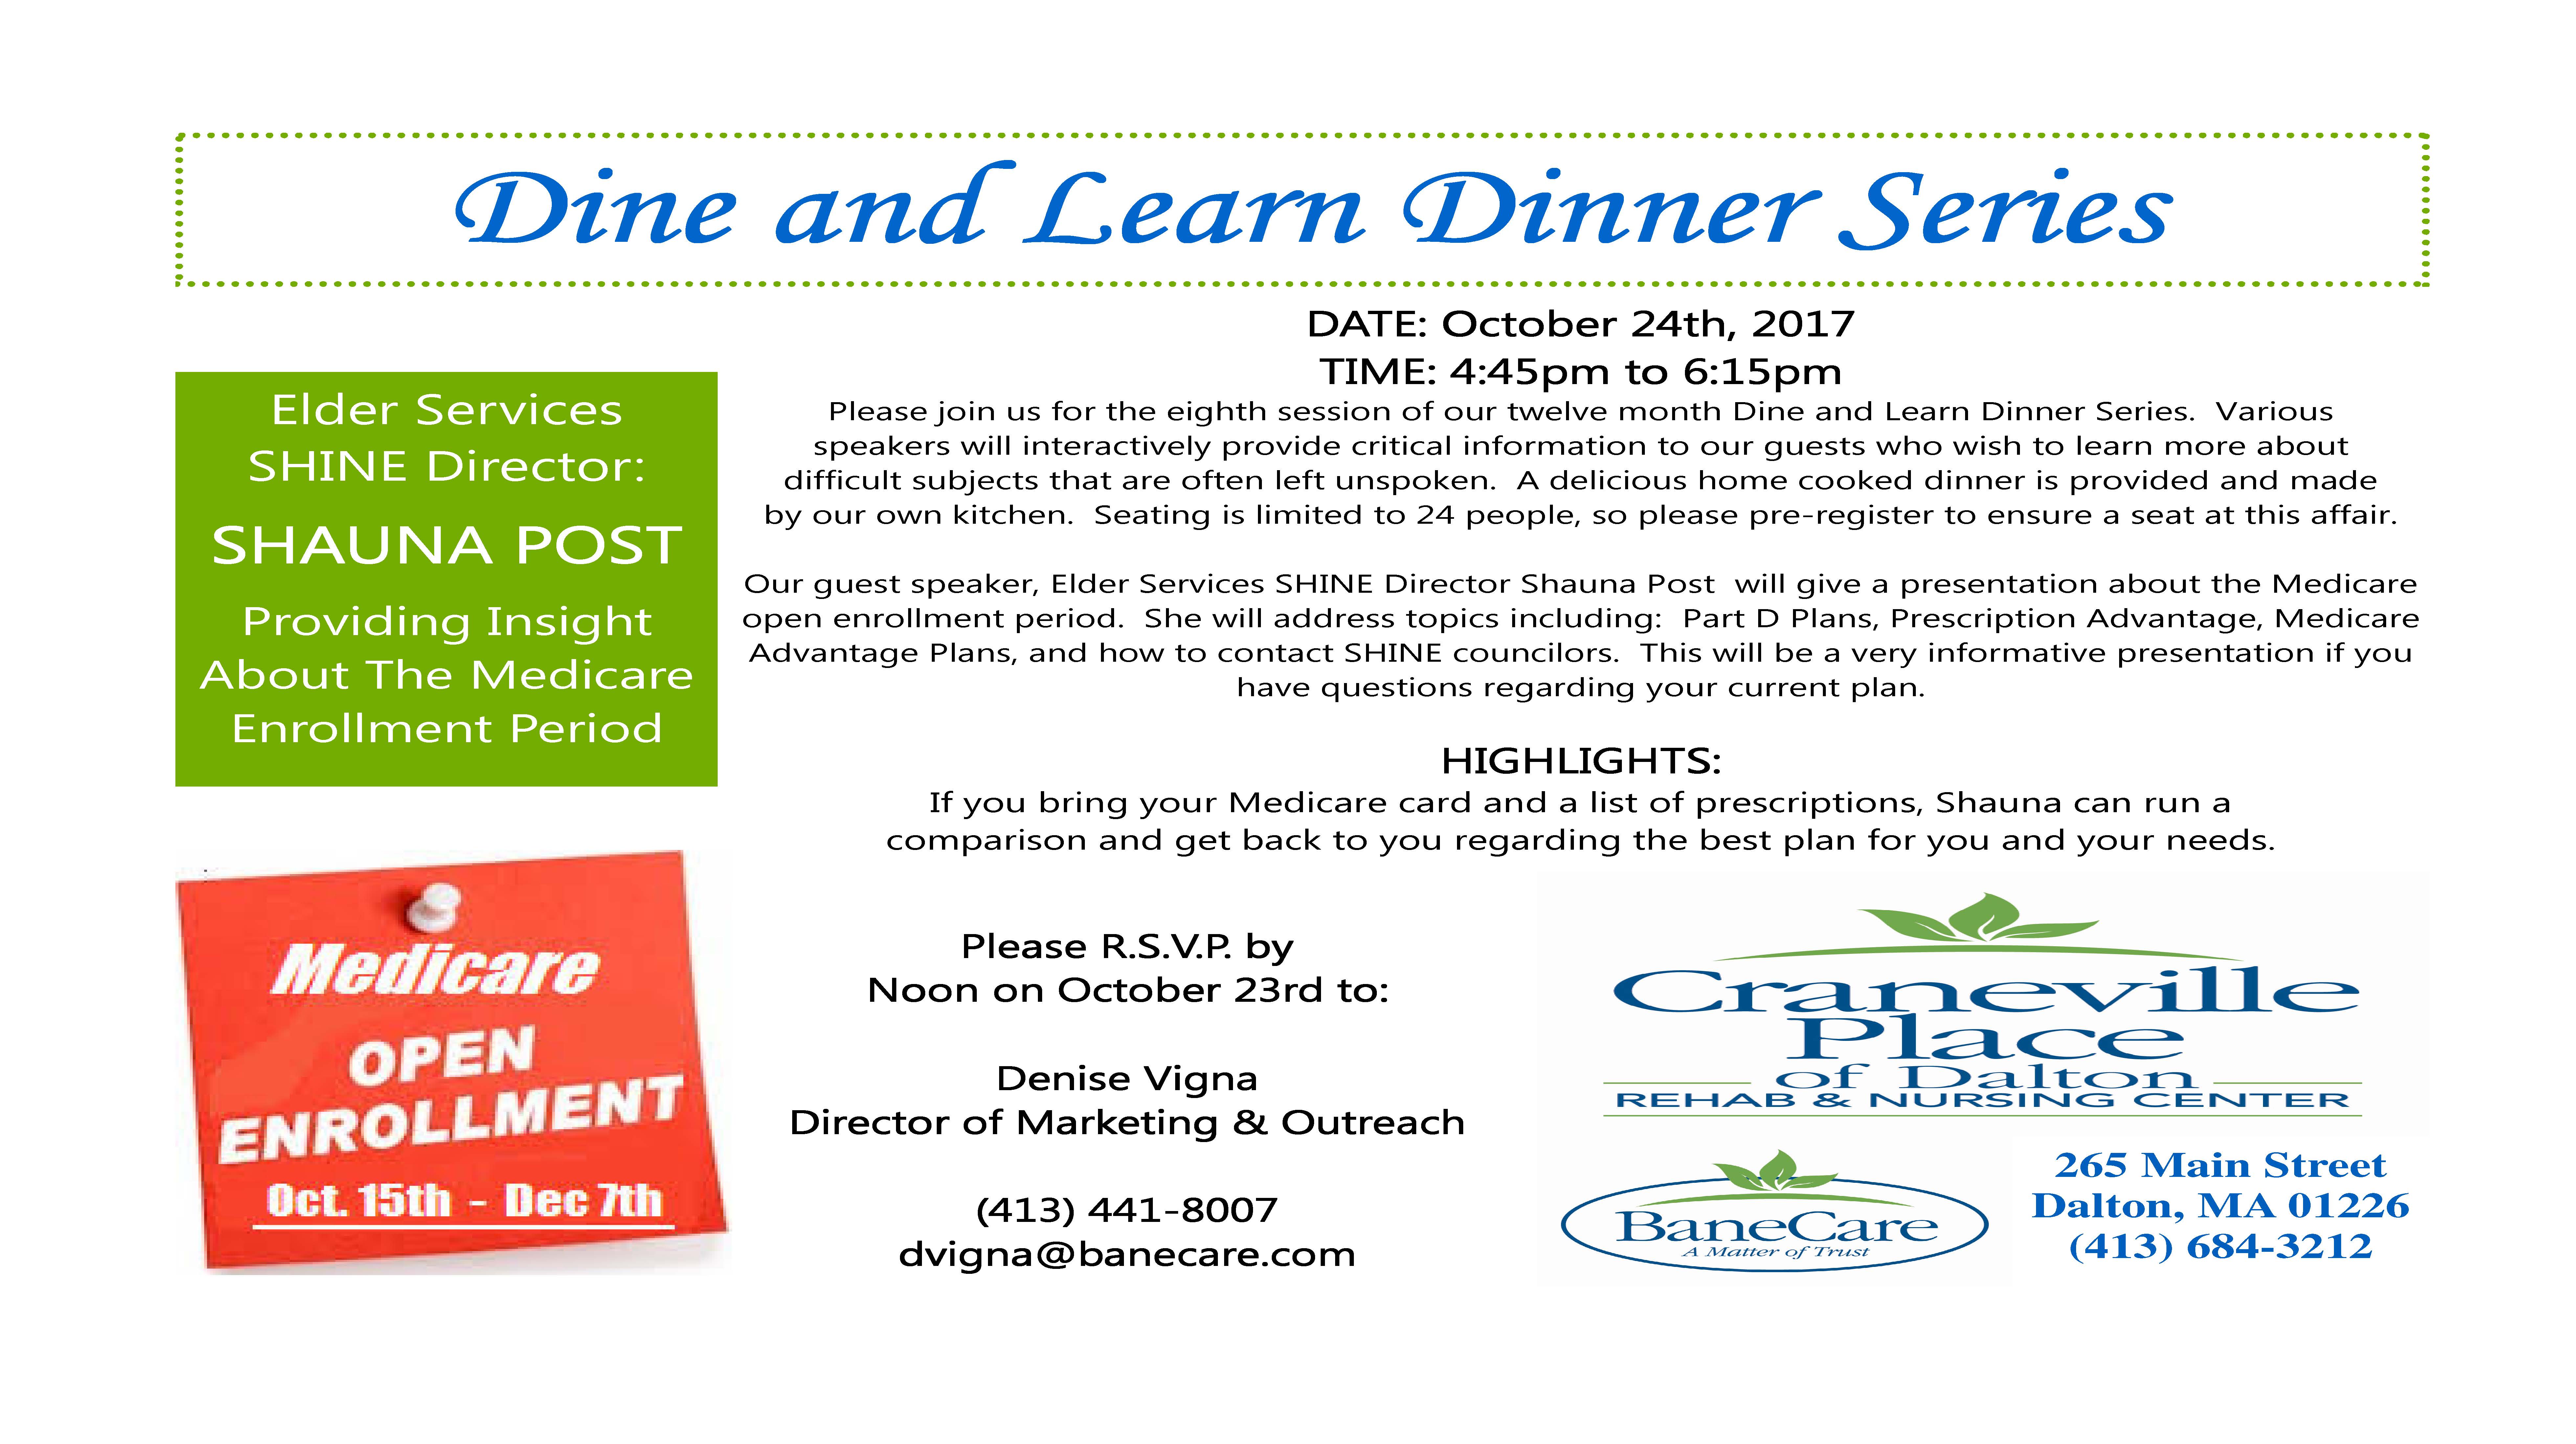 2017 Craneville Place October Dine and Learn in PDF.jpg